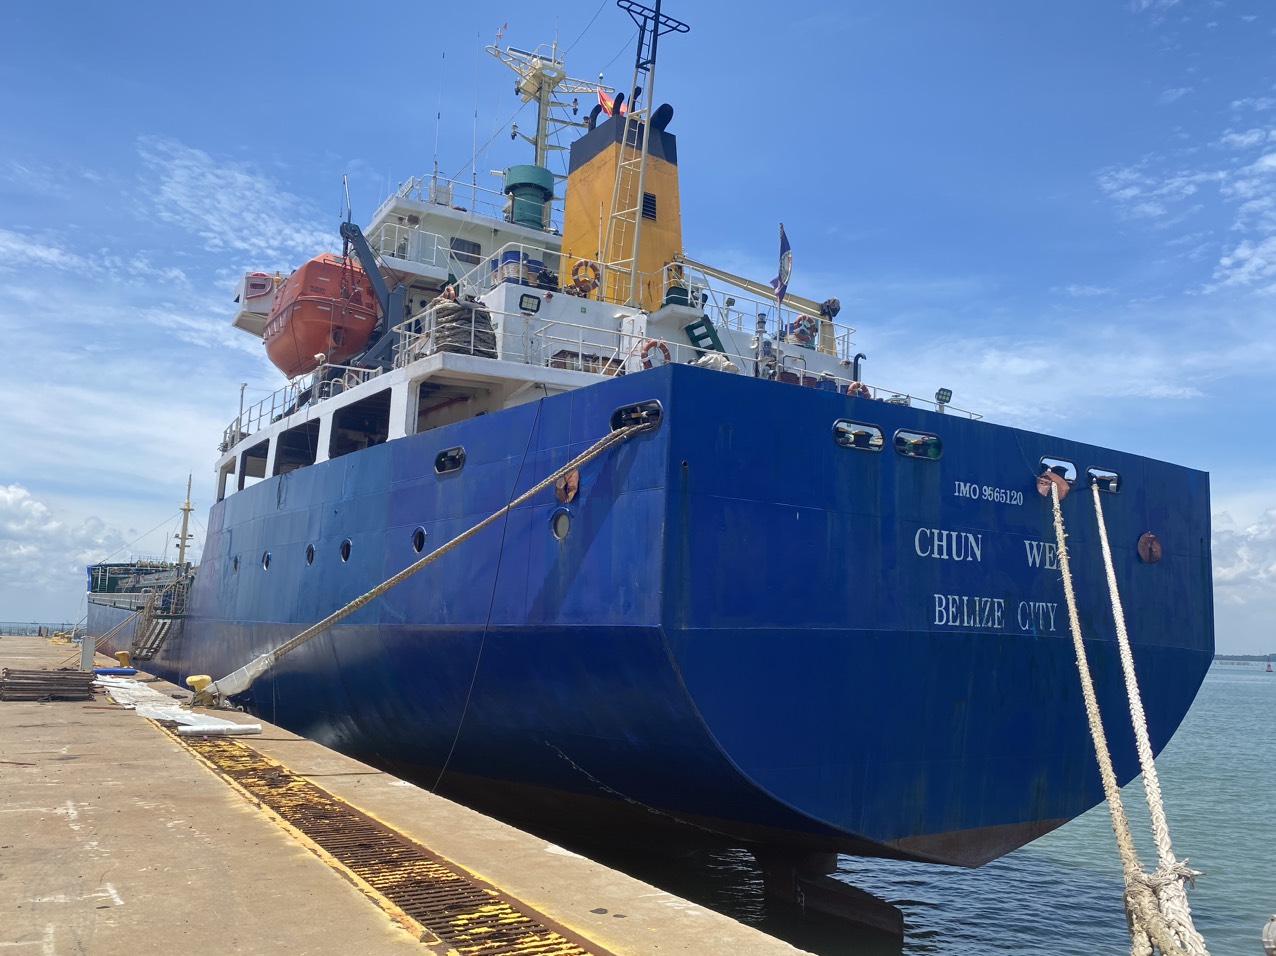 Permanent repair ship side damaged due to collided by fishing boat for MV. CHUN WEI